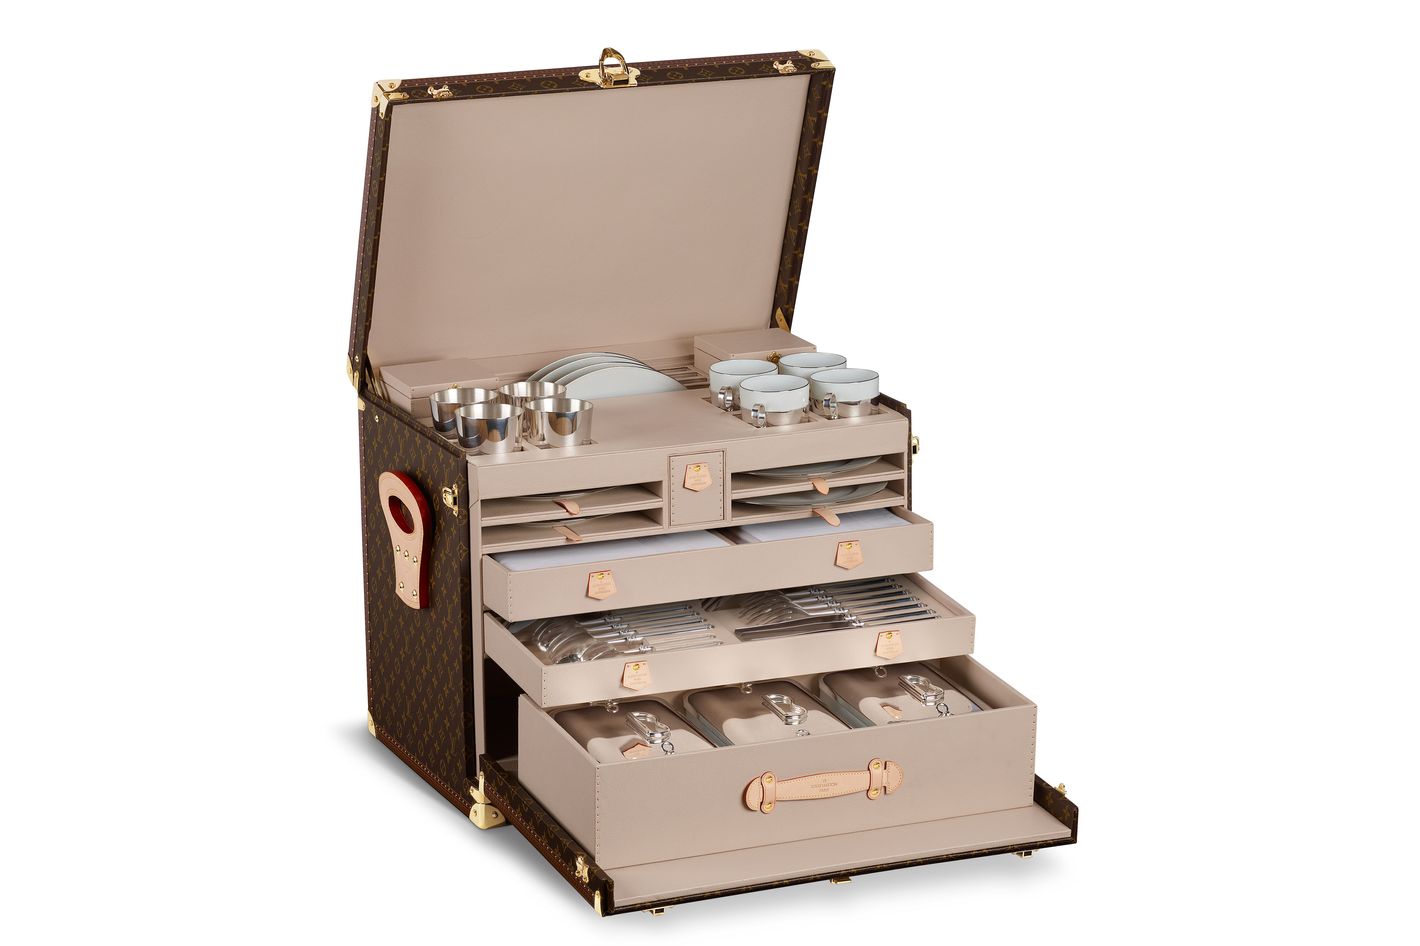 Louis Vuitton Paradis Impérial Trunk is the Way to Experience Cognac